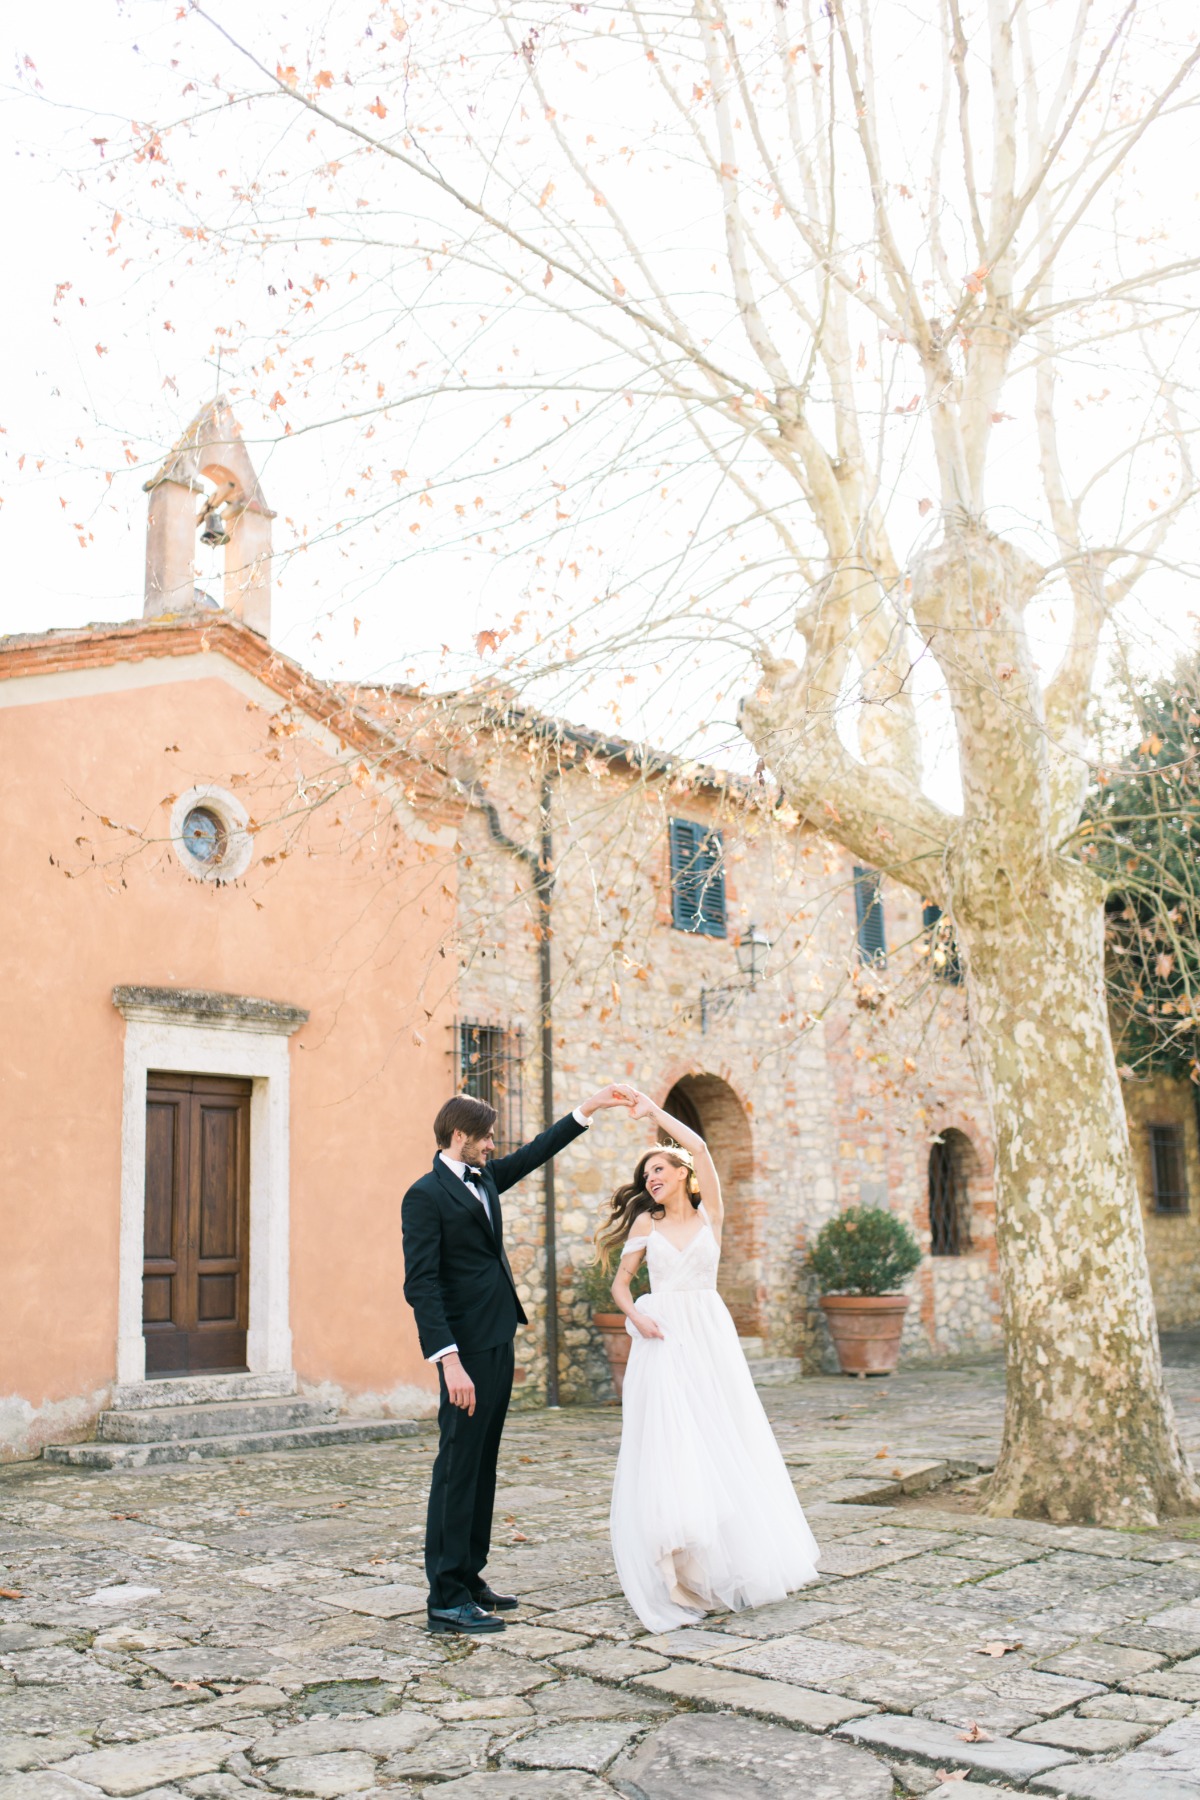 This Awe-Inspiring Shoot In Tuscany Has Us Lusting for a Fall Wedding Surrounded By Cypress Trees